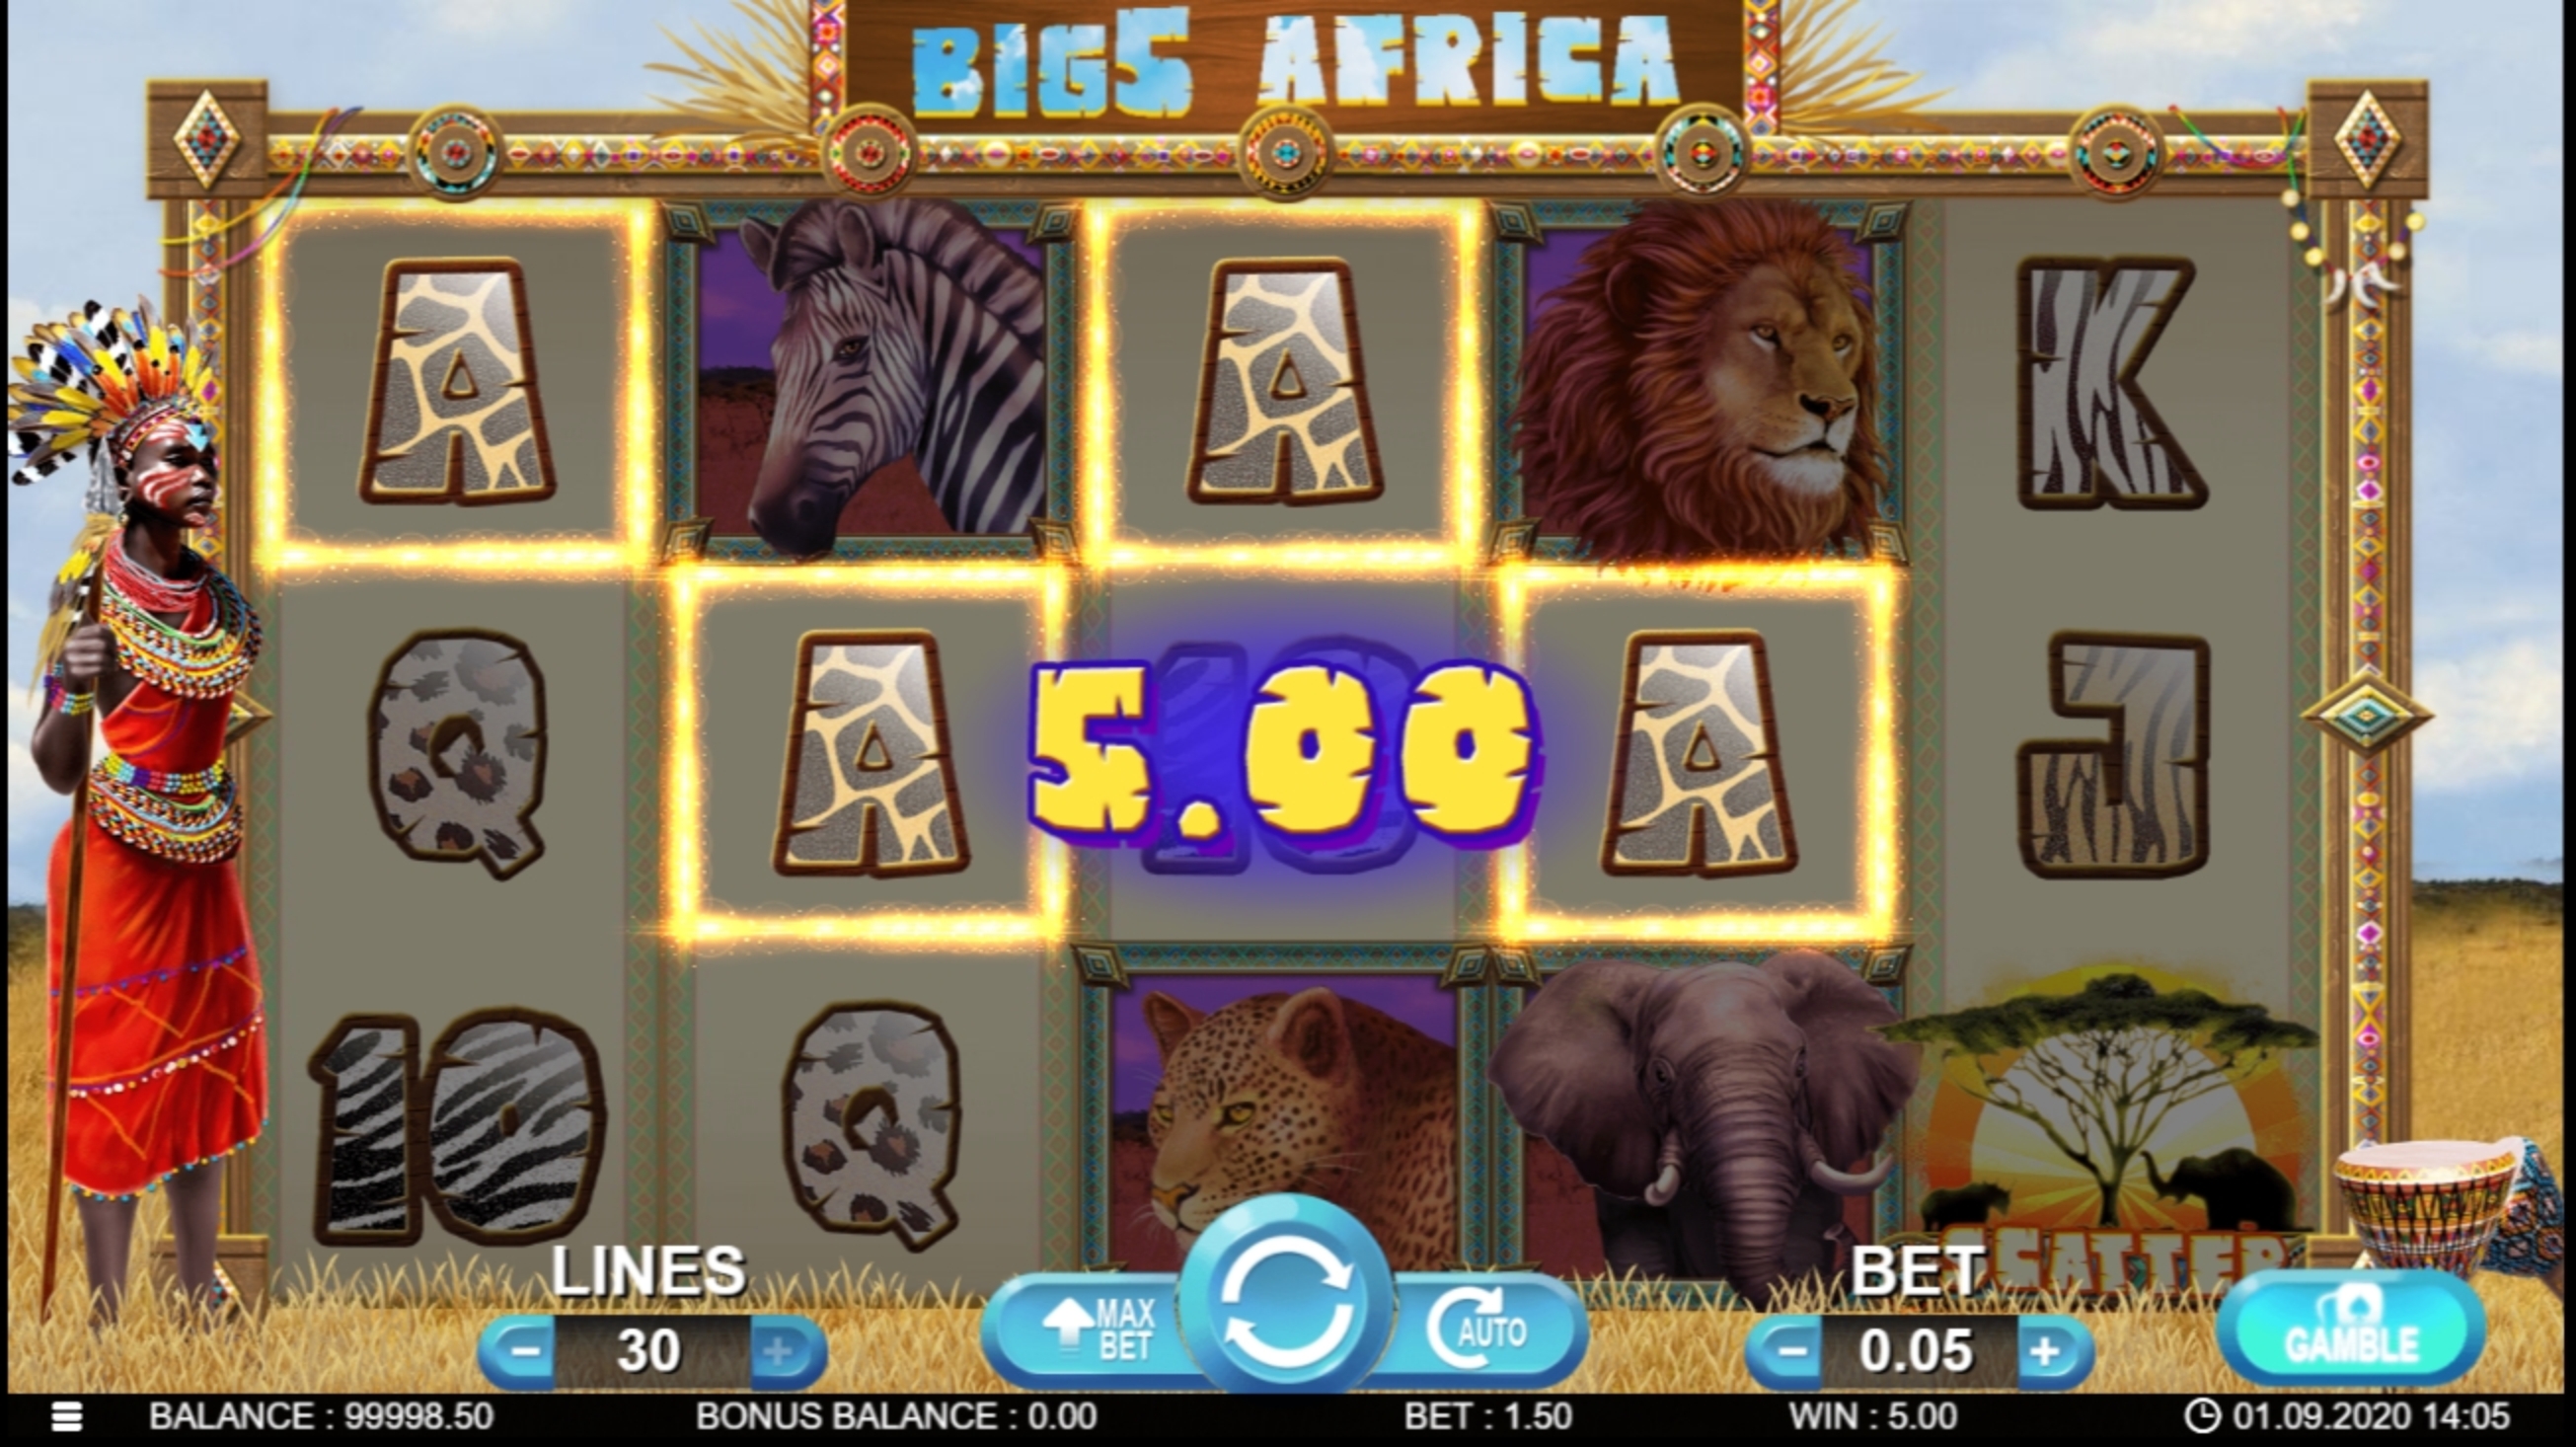 Win Money in Big 5 Africa Free Slot Game by 7mojos